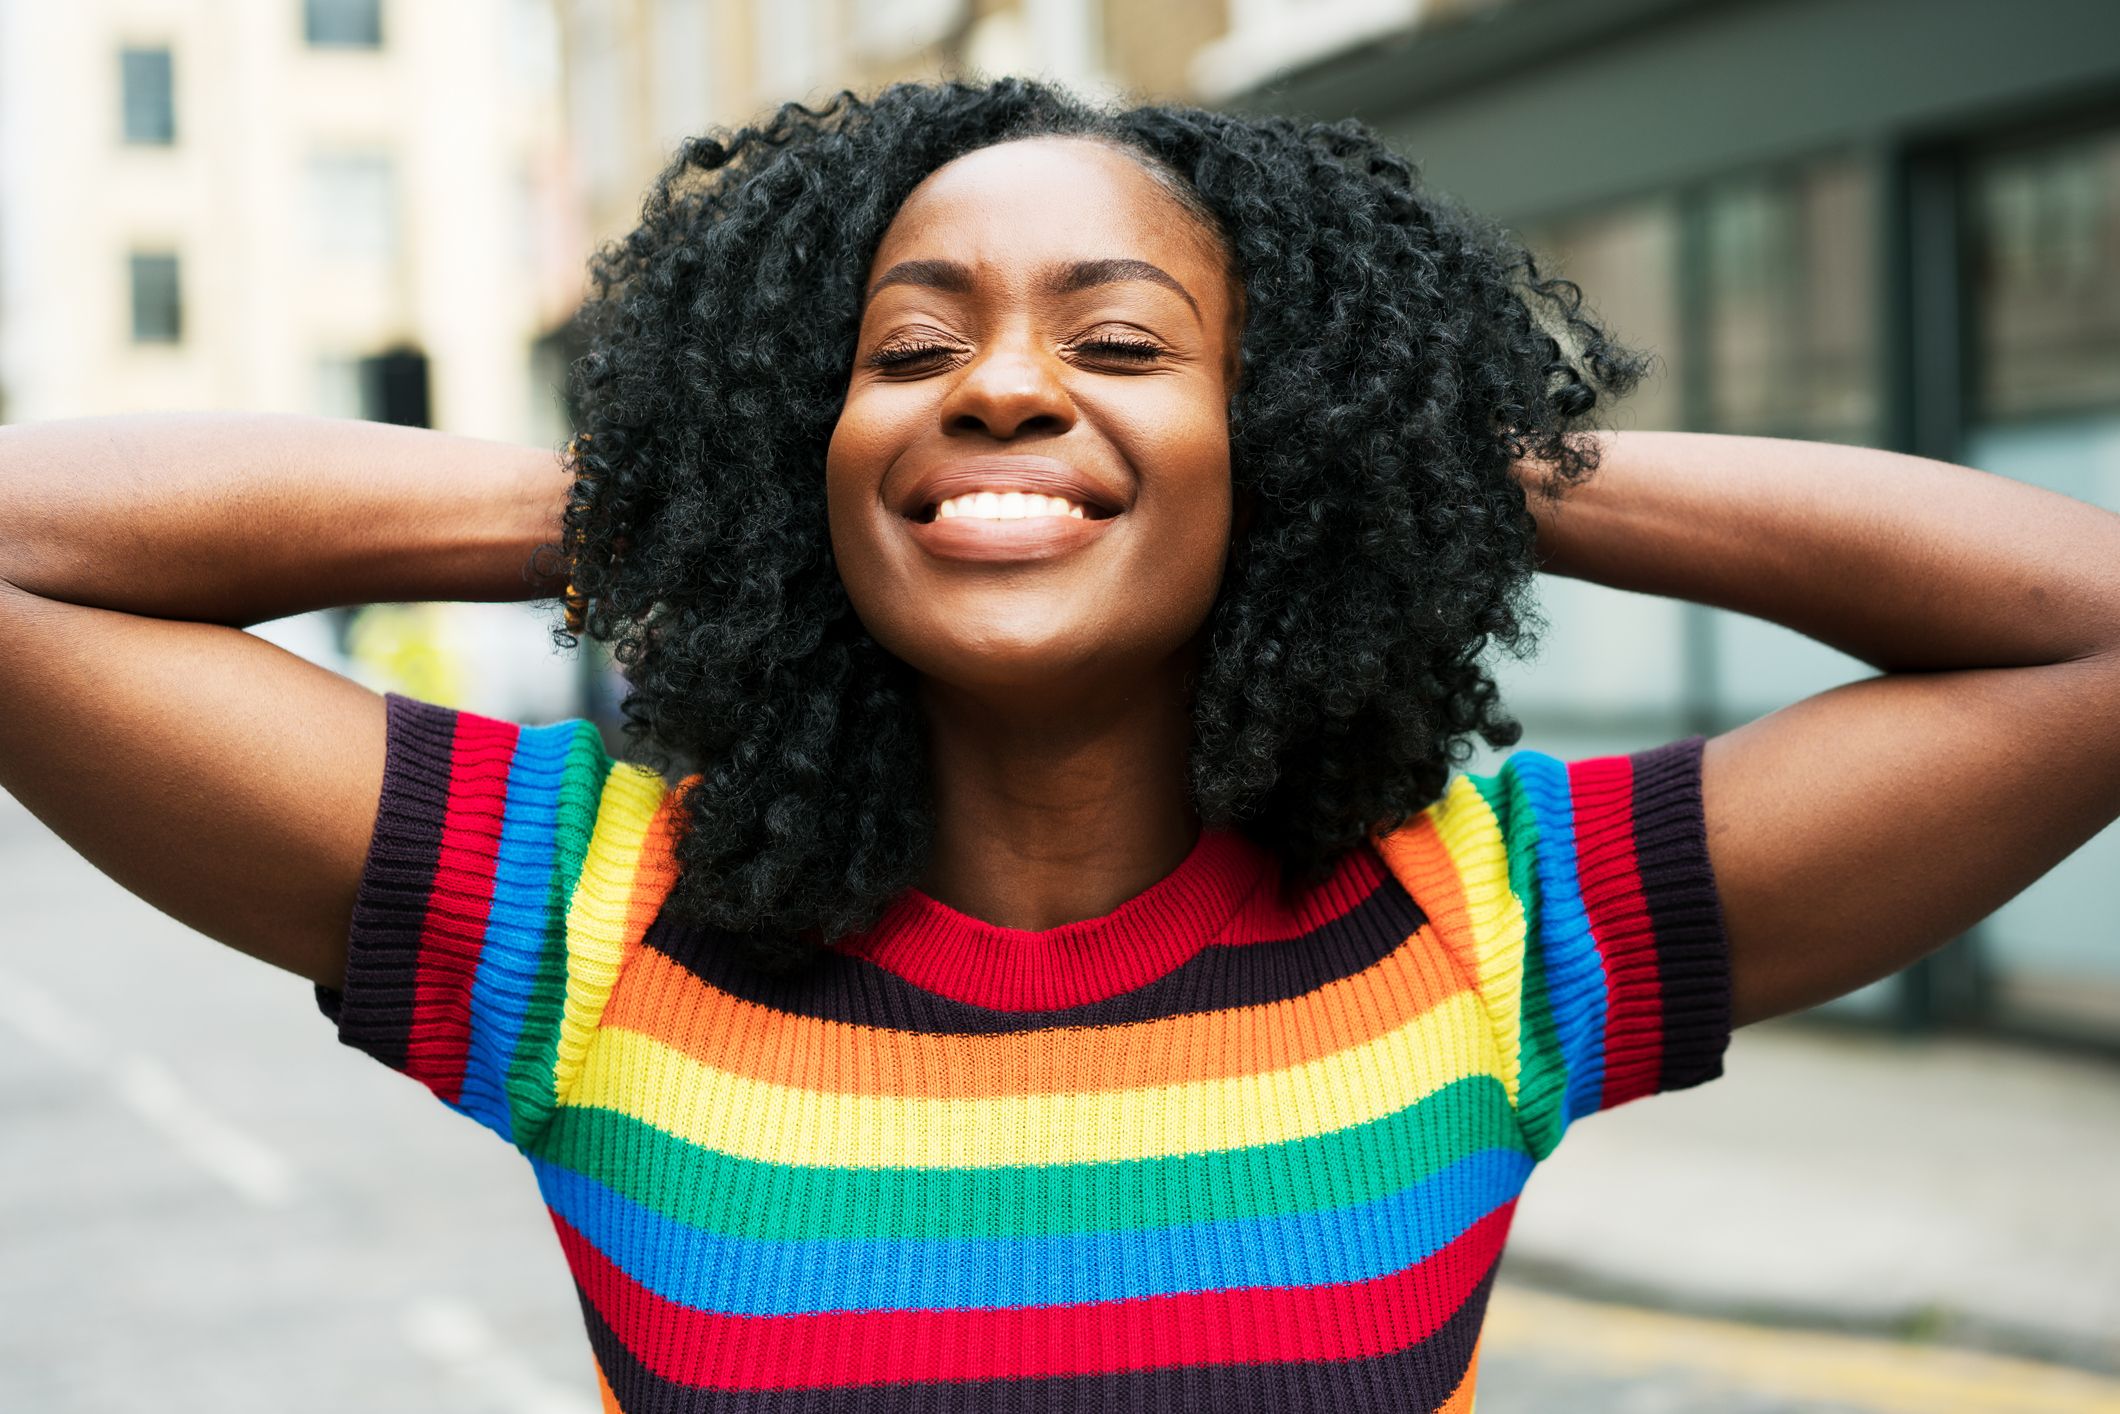 25 things you can do to make yourself feel happier